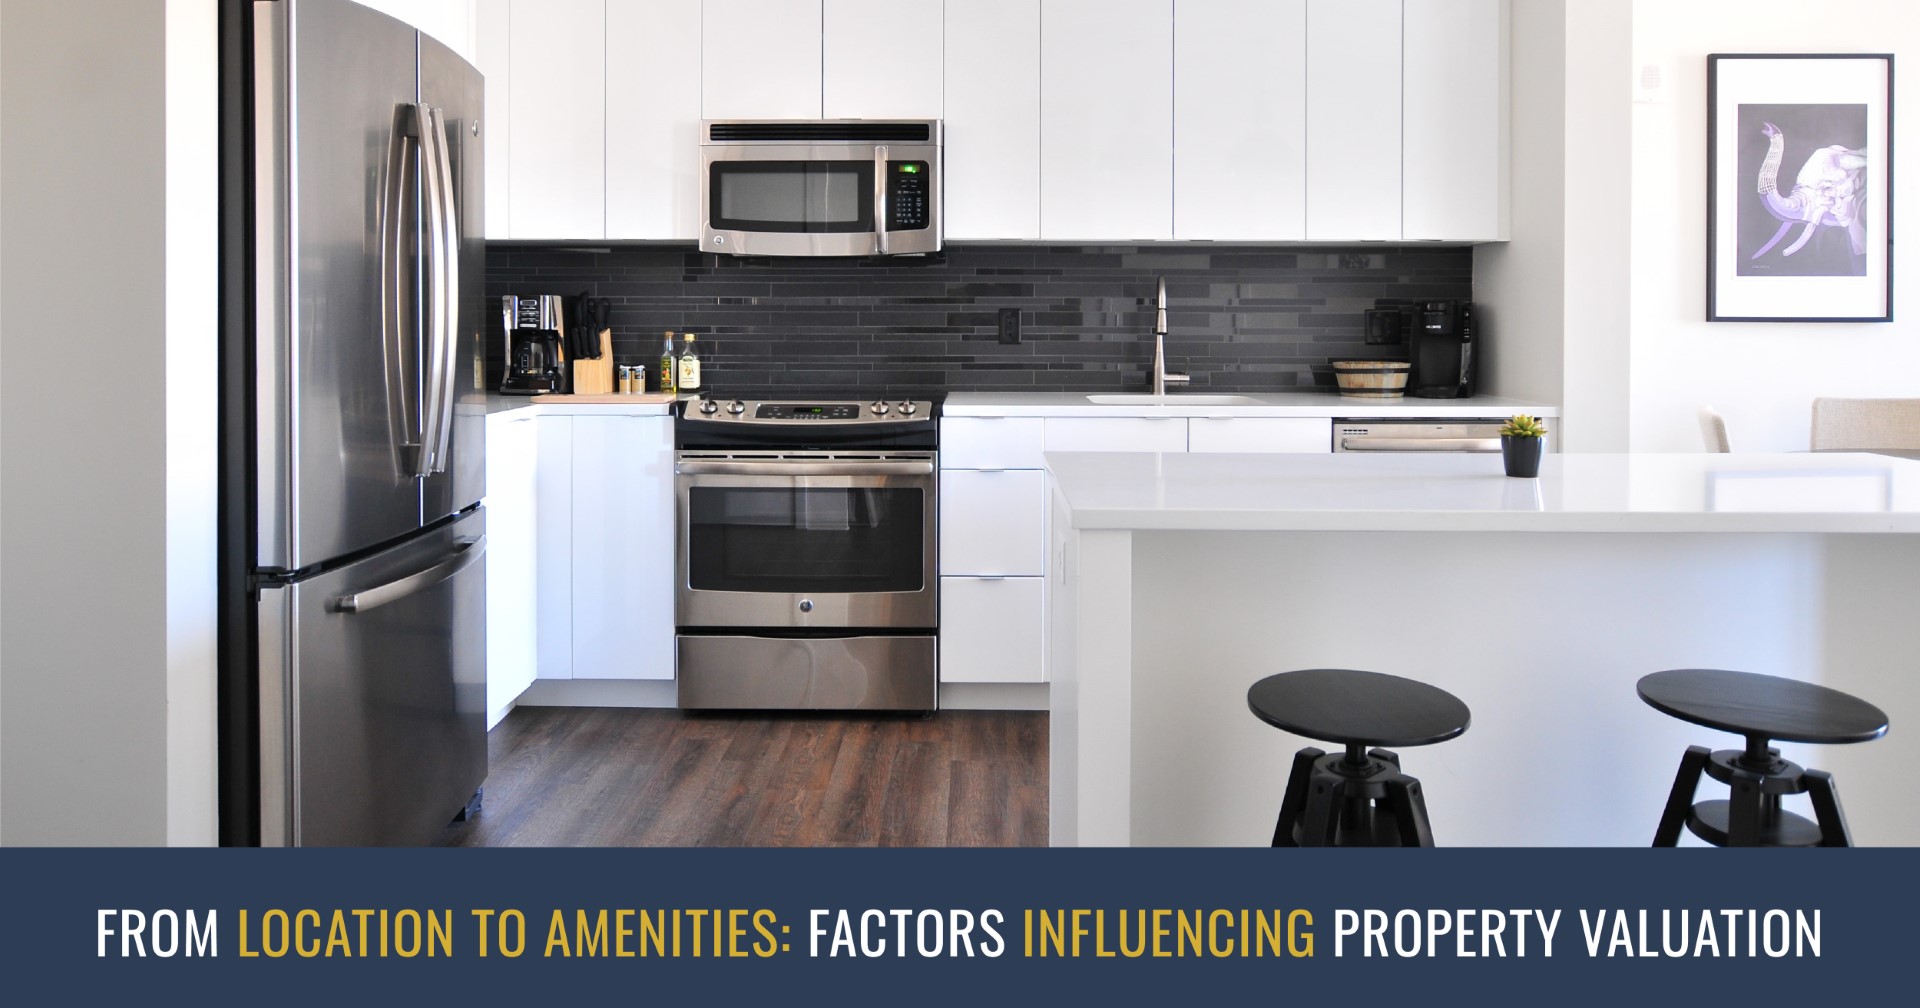 FROM LOCATION TO AMENITIES: FACTORS INFLUENCING PROPERTY VALUATION